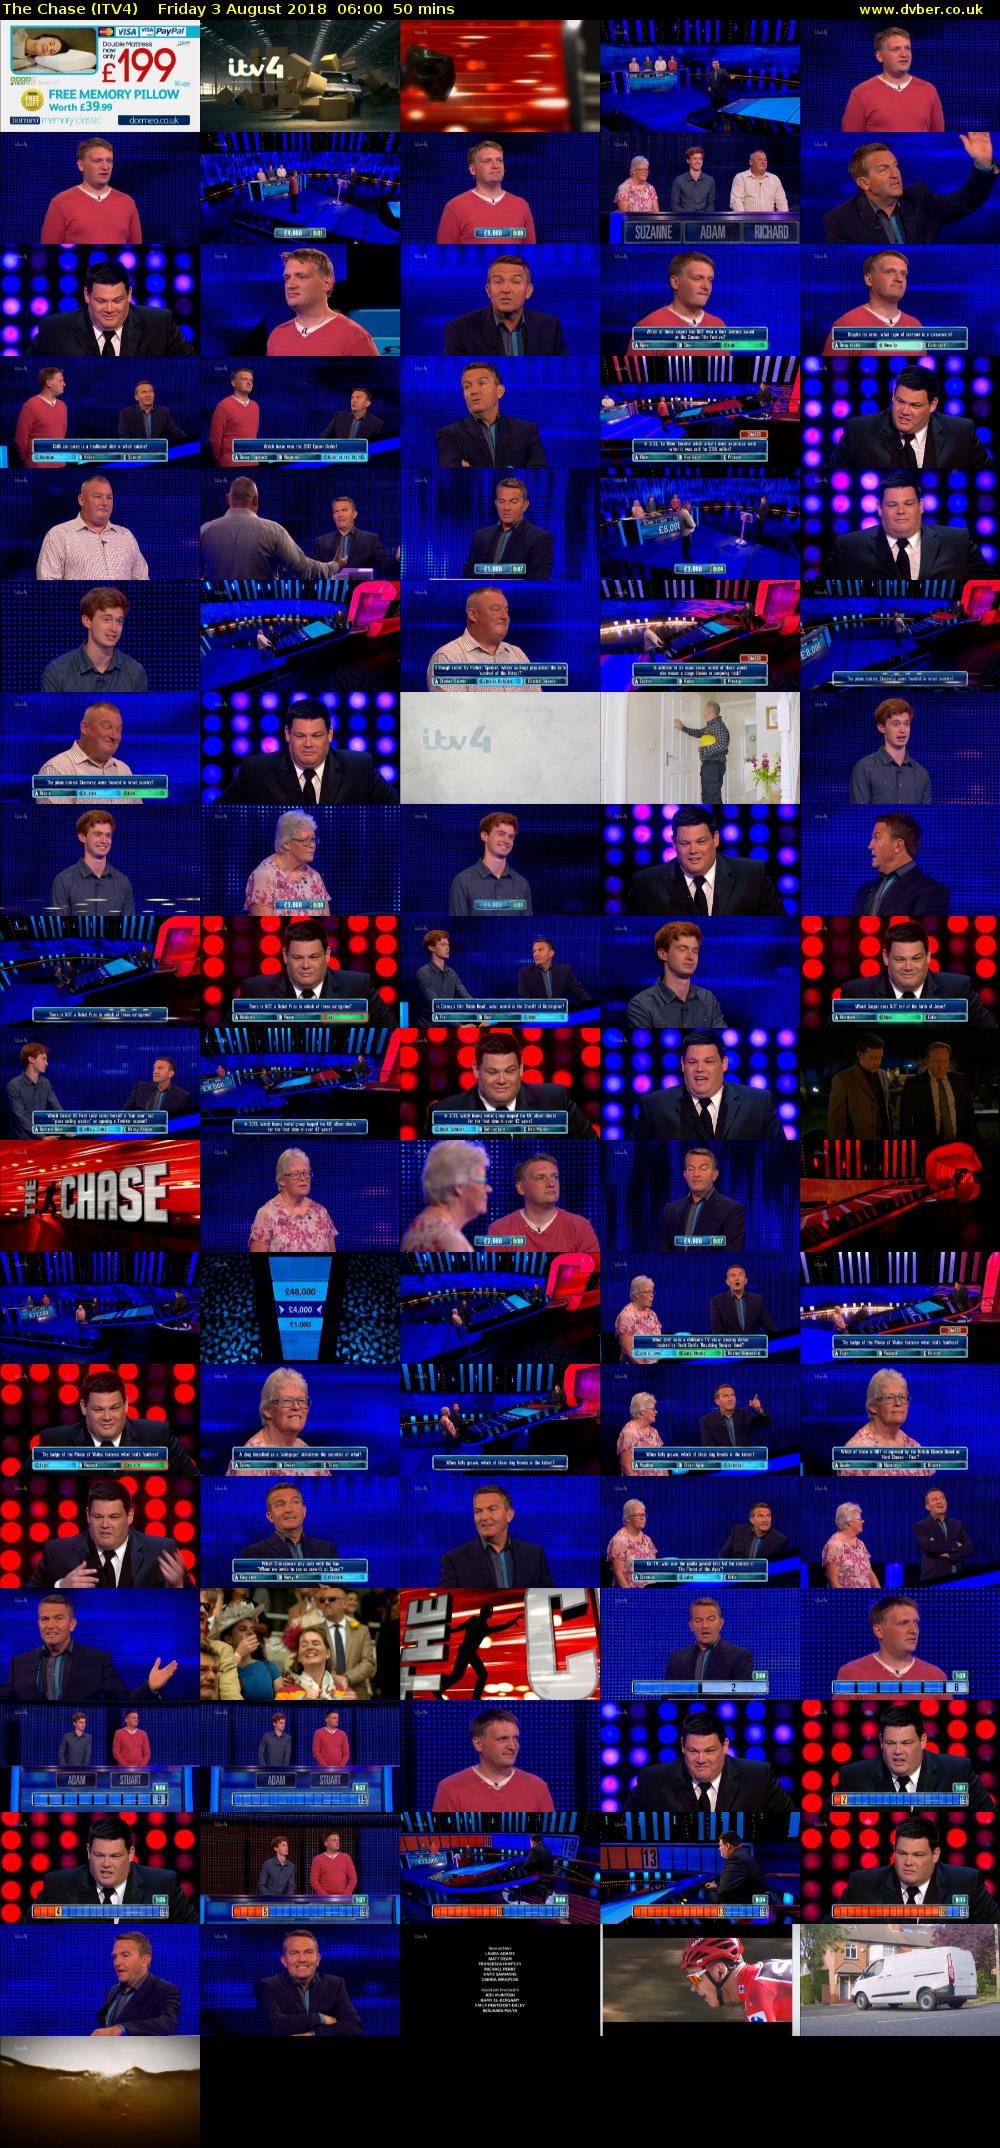 The Chase (ITV4) Friday 3 August 2018 06:00 - 06:50